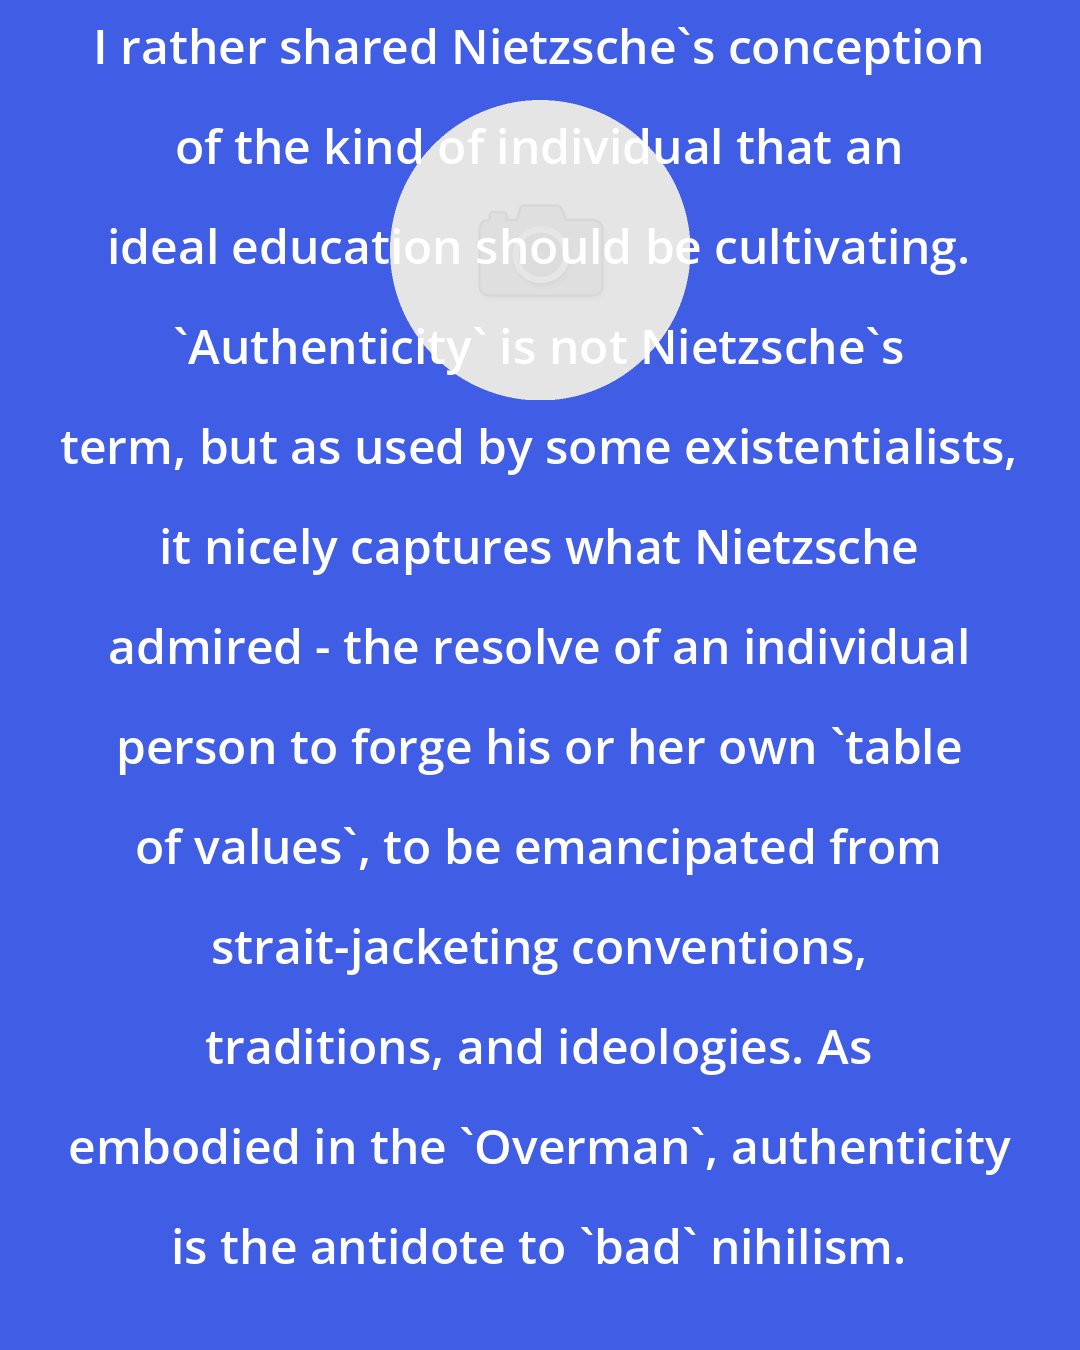 David E. Cooper: I rather shared Nietzsche's conception of the kind of individual that an ideal education should be cultivating. 'Authenticity' is not Nietzsche's term, but as used by some existentialists, it nicely captures what Nietzsche admired - the resolve of an individual person to forge his or her own 'table of values', to be emancipated from strait-jacketing conventions, traditions, and ideologies. As embodied in the 'Overman', authenticity is the antidote to 'bad' nihilism.